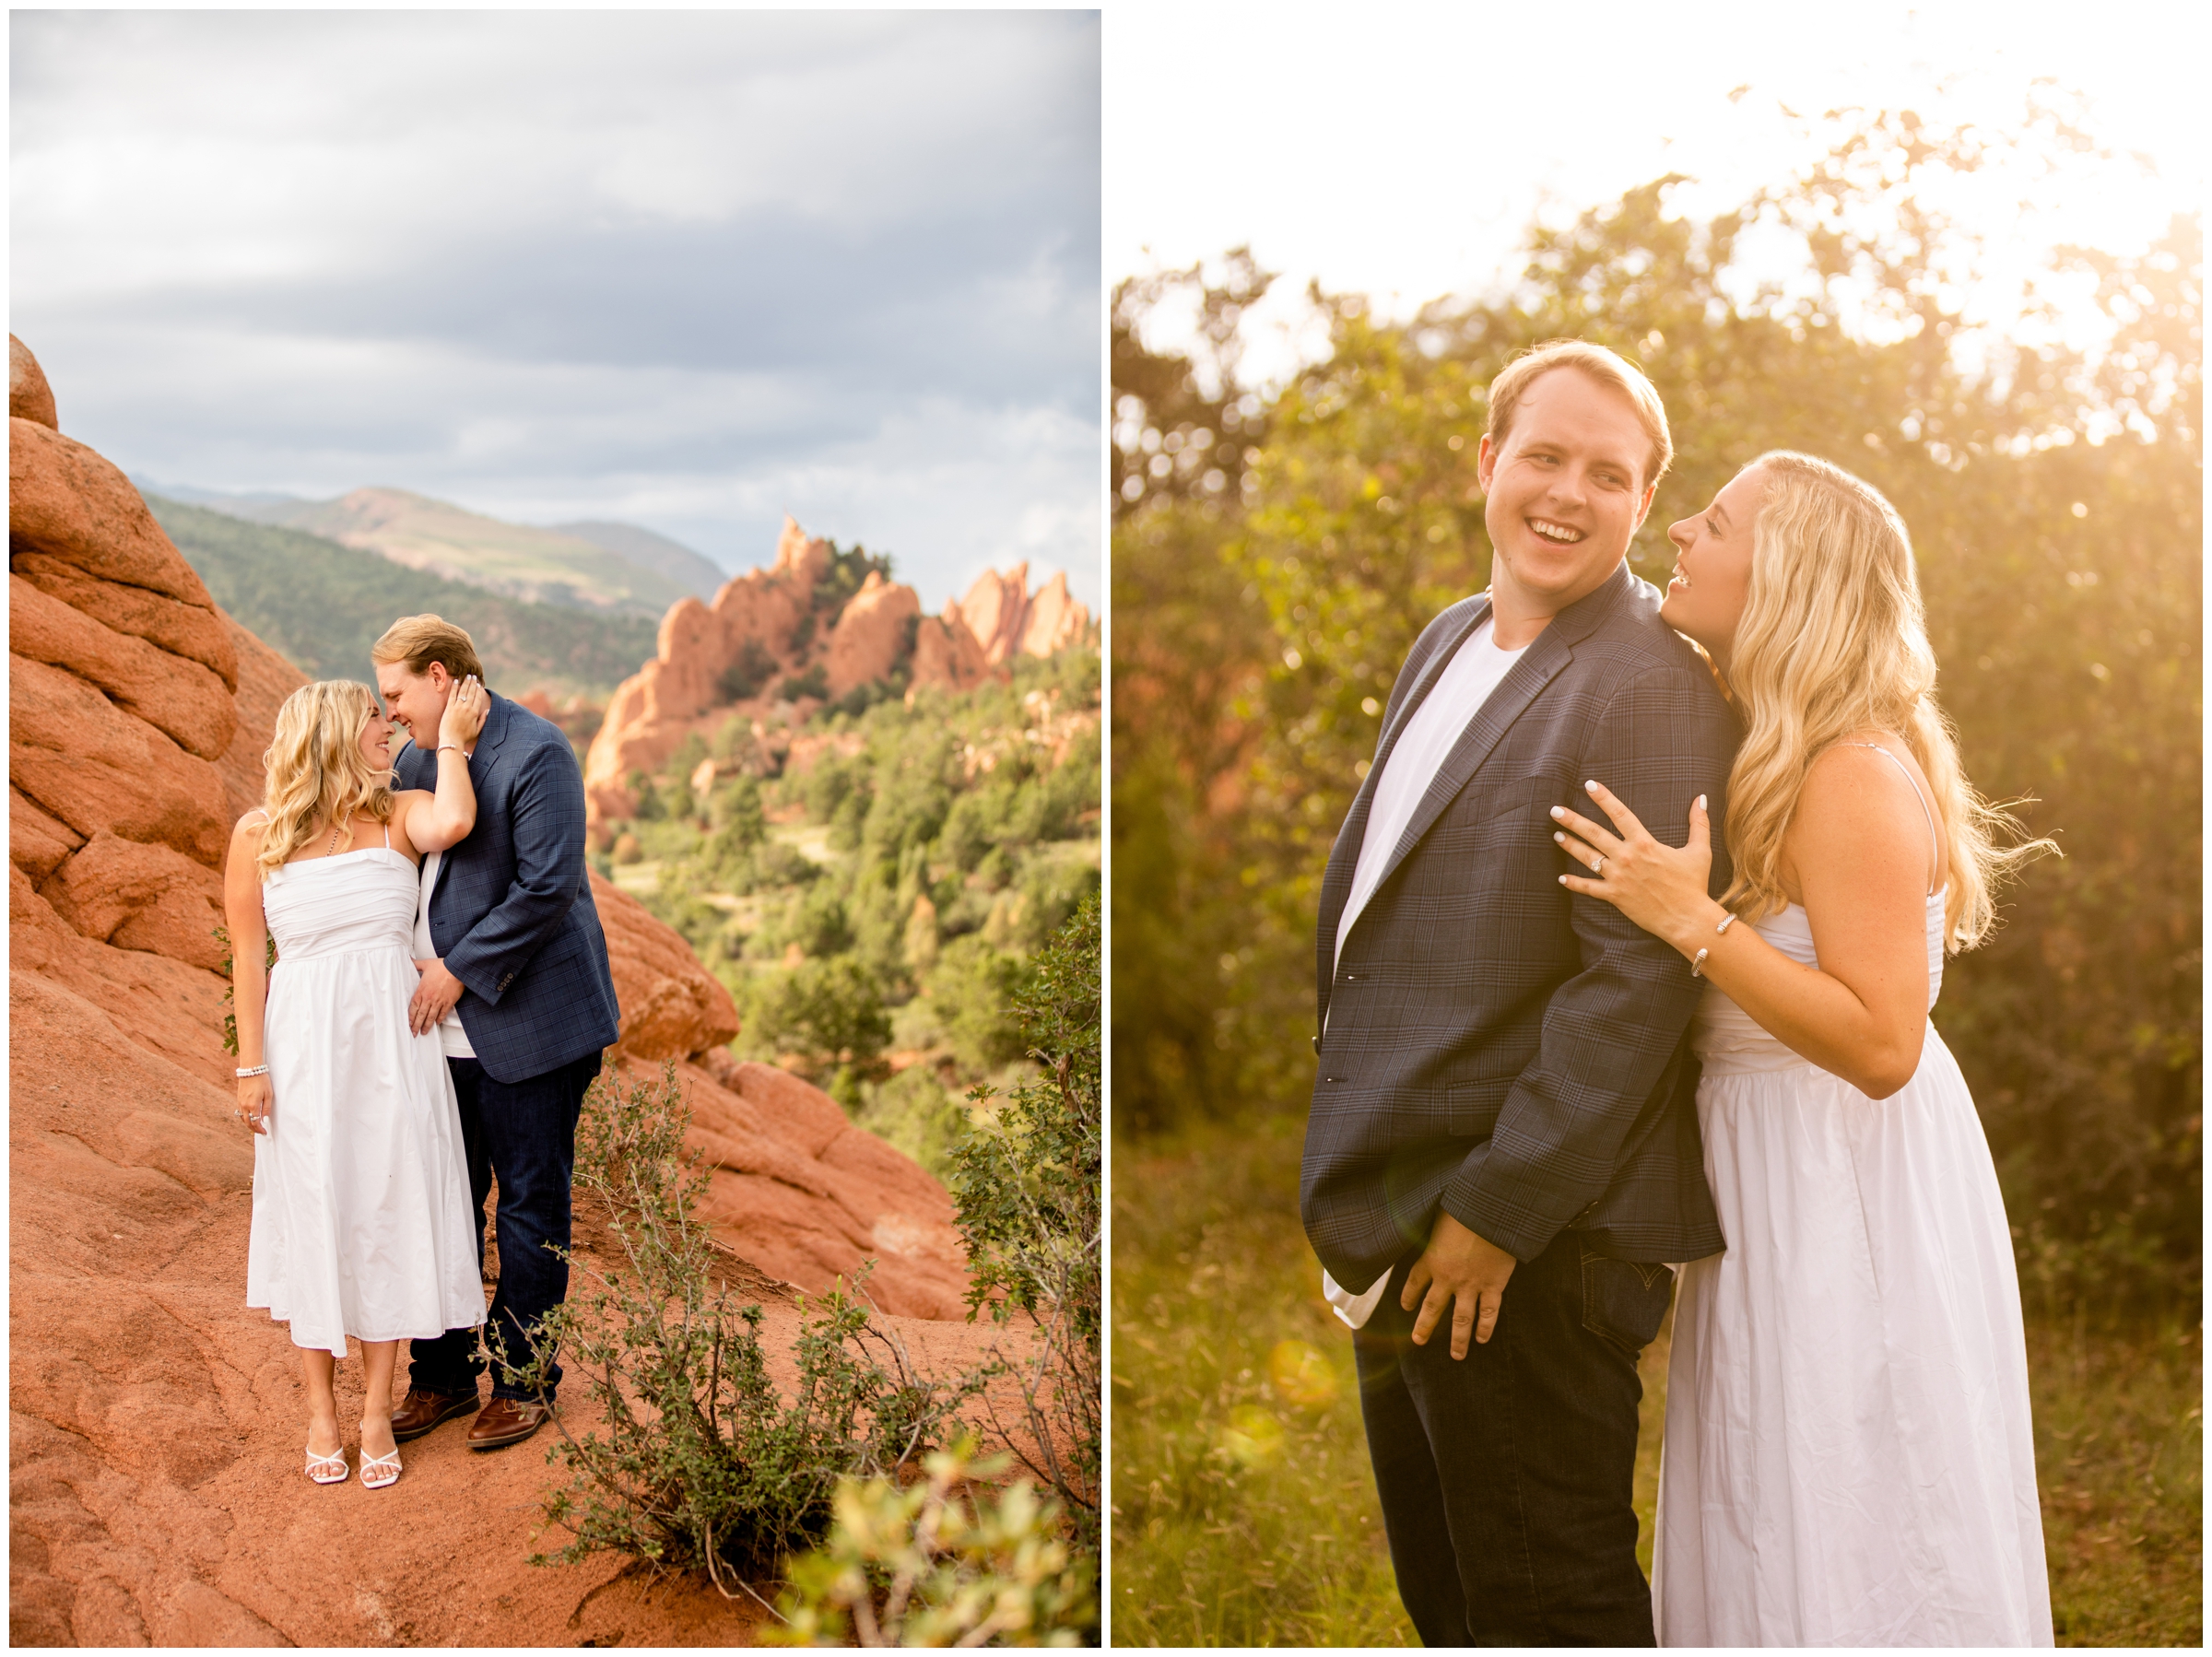 Colorado Springs couples photography inspiration at High Point Overlook